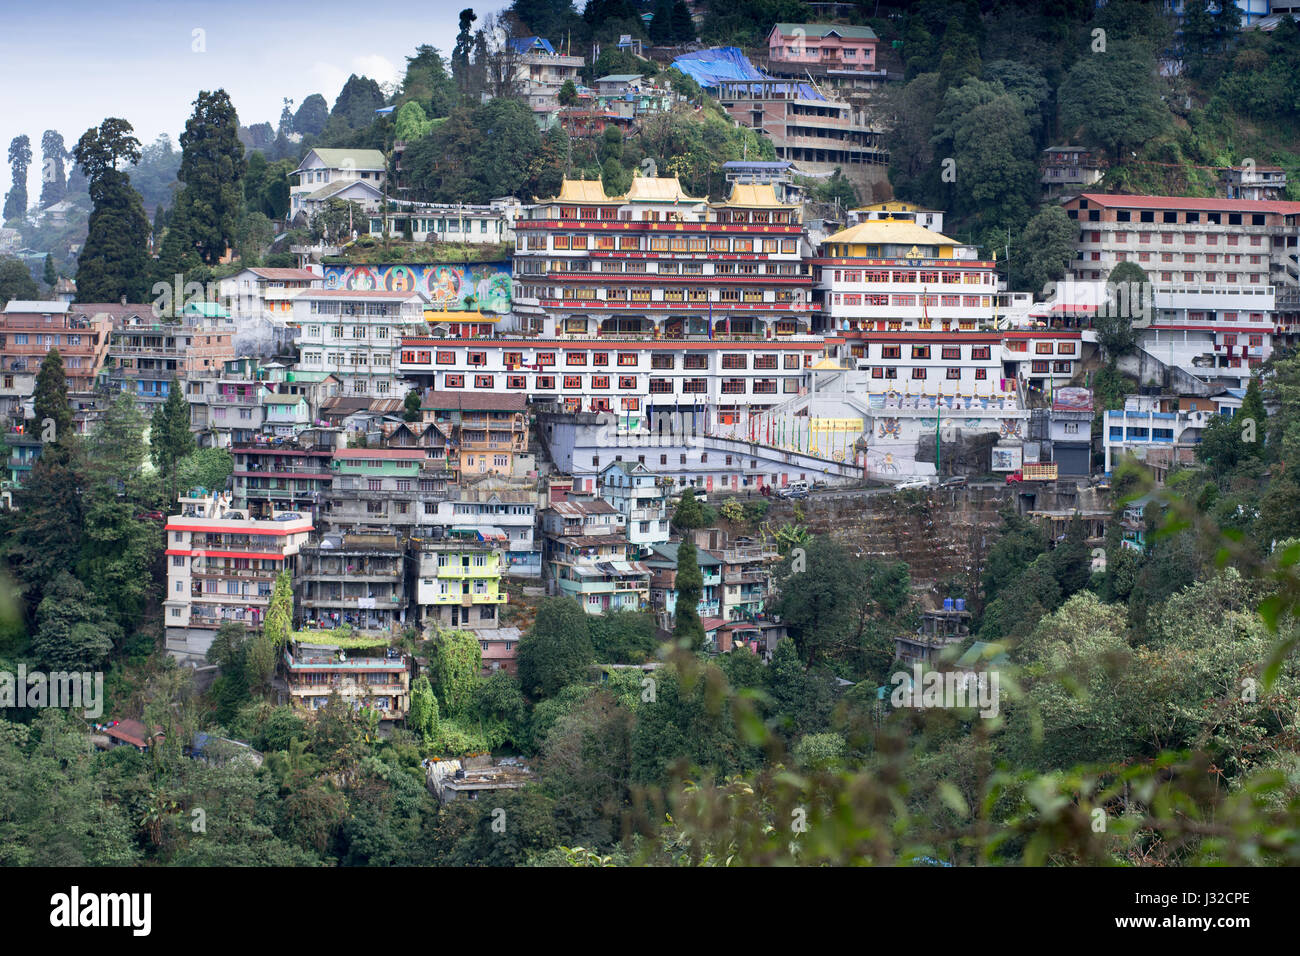 DARJEELING, INDIA - NOVEMBER 28, 2016: Druk Thupten Sangag Choling Monastery or Dali Monastery located in the middle of Darjeeling hill town. It is on Stock Photo